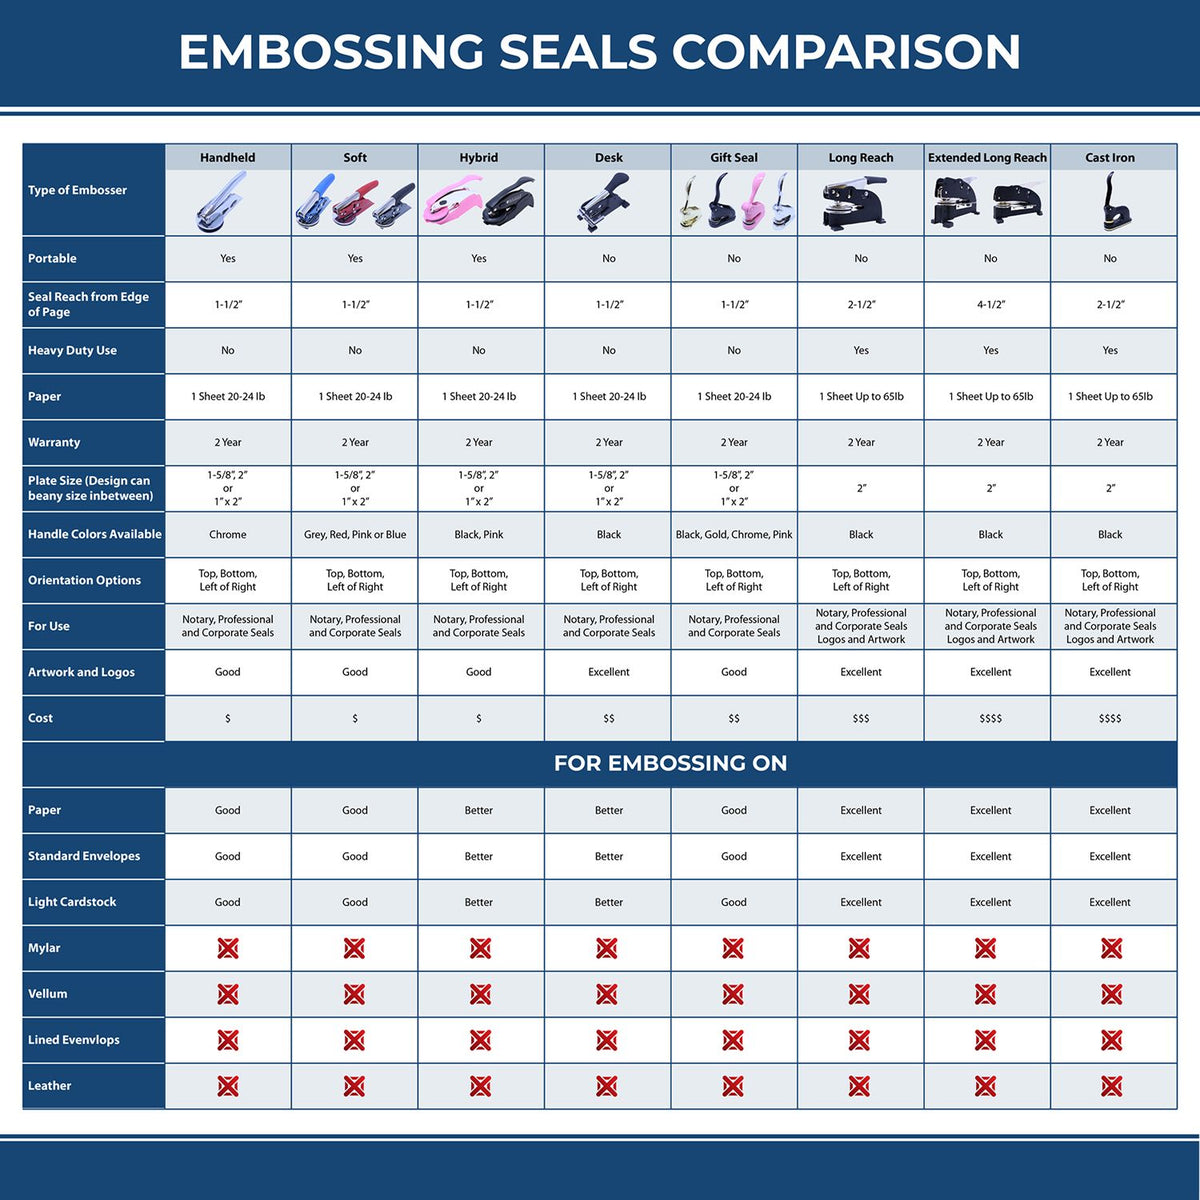 A comparison chart for the different types of mount models available for the Handheld Iowa Land Surveyor Seal.